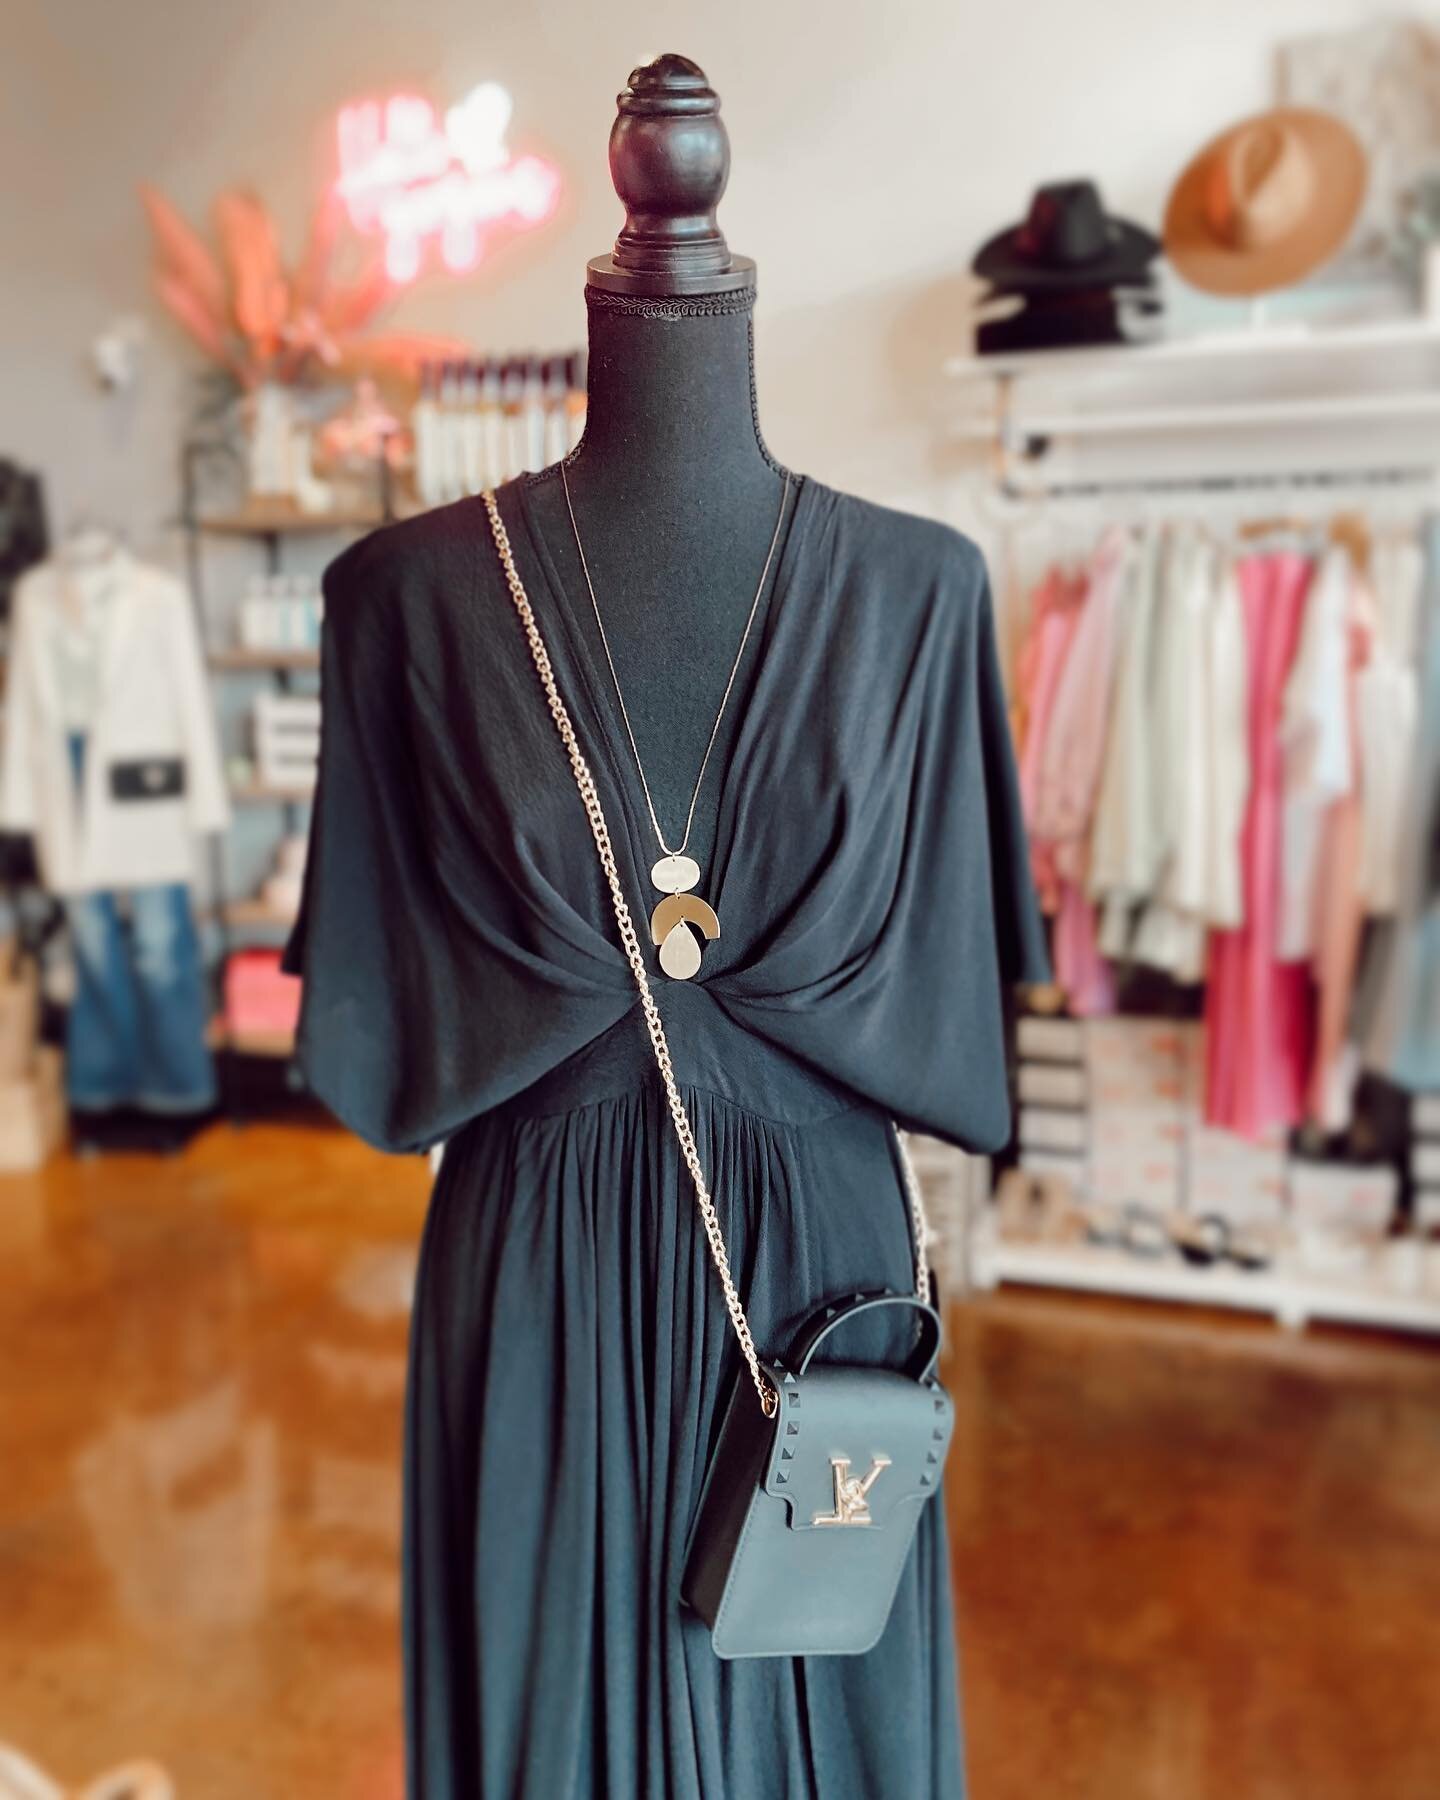 Our Phoeb&egrave; Maxi is a Must&bull;Have with a SXY Deep&bull;V + High&bull;Fessura&rsquo;s🔥 Pairs perfectly with our Newest Onthig&oacute; Crossbody Bag!! Limited Edition, Shop Today 10-5 💋💋

#LBD #backinblack #musthave #vacationvibes #springfa